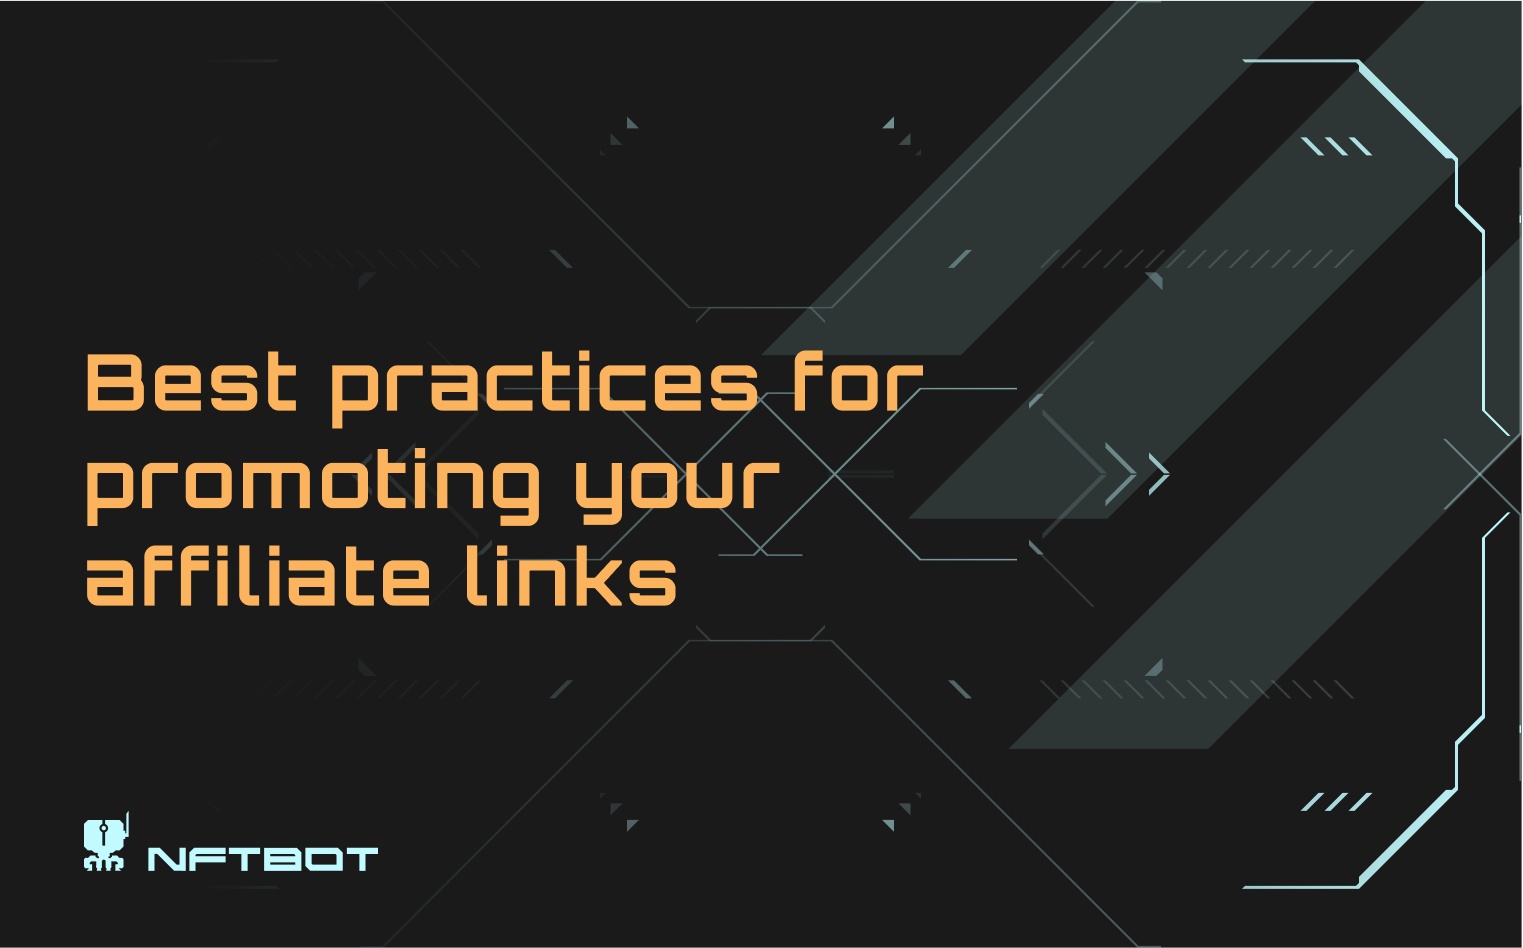 Best practices for promoting your affiliate links